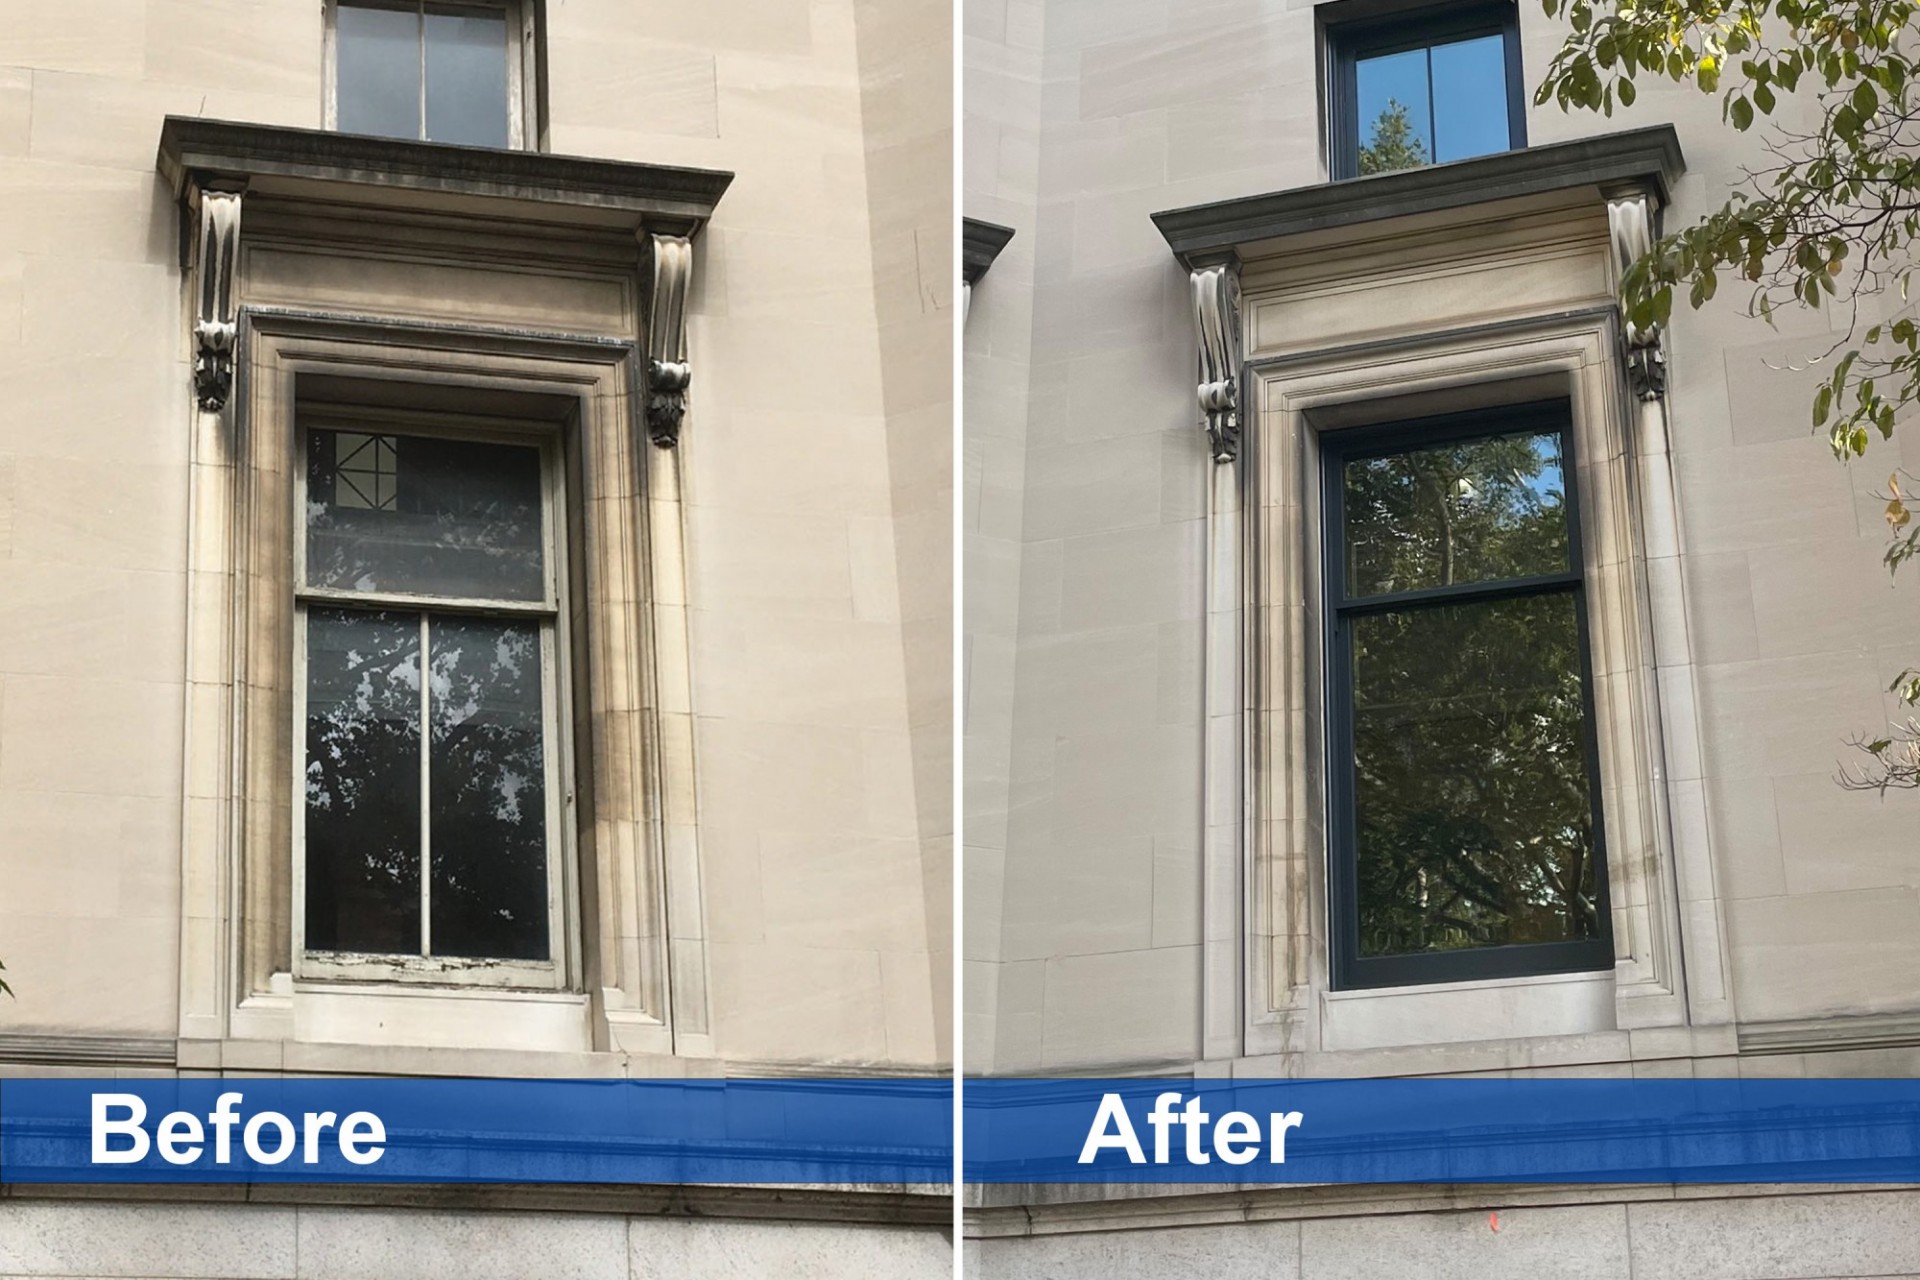 Before and after photos of the completed corner window replacements at Low Library.